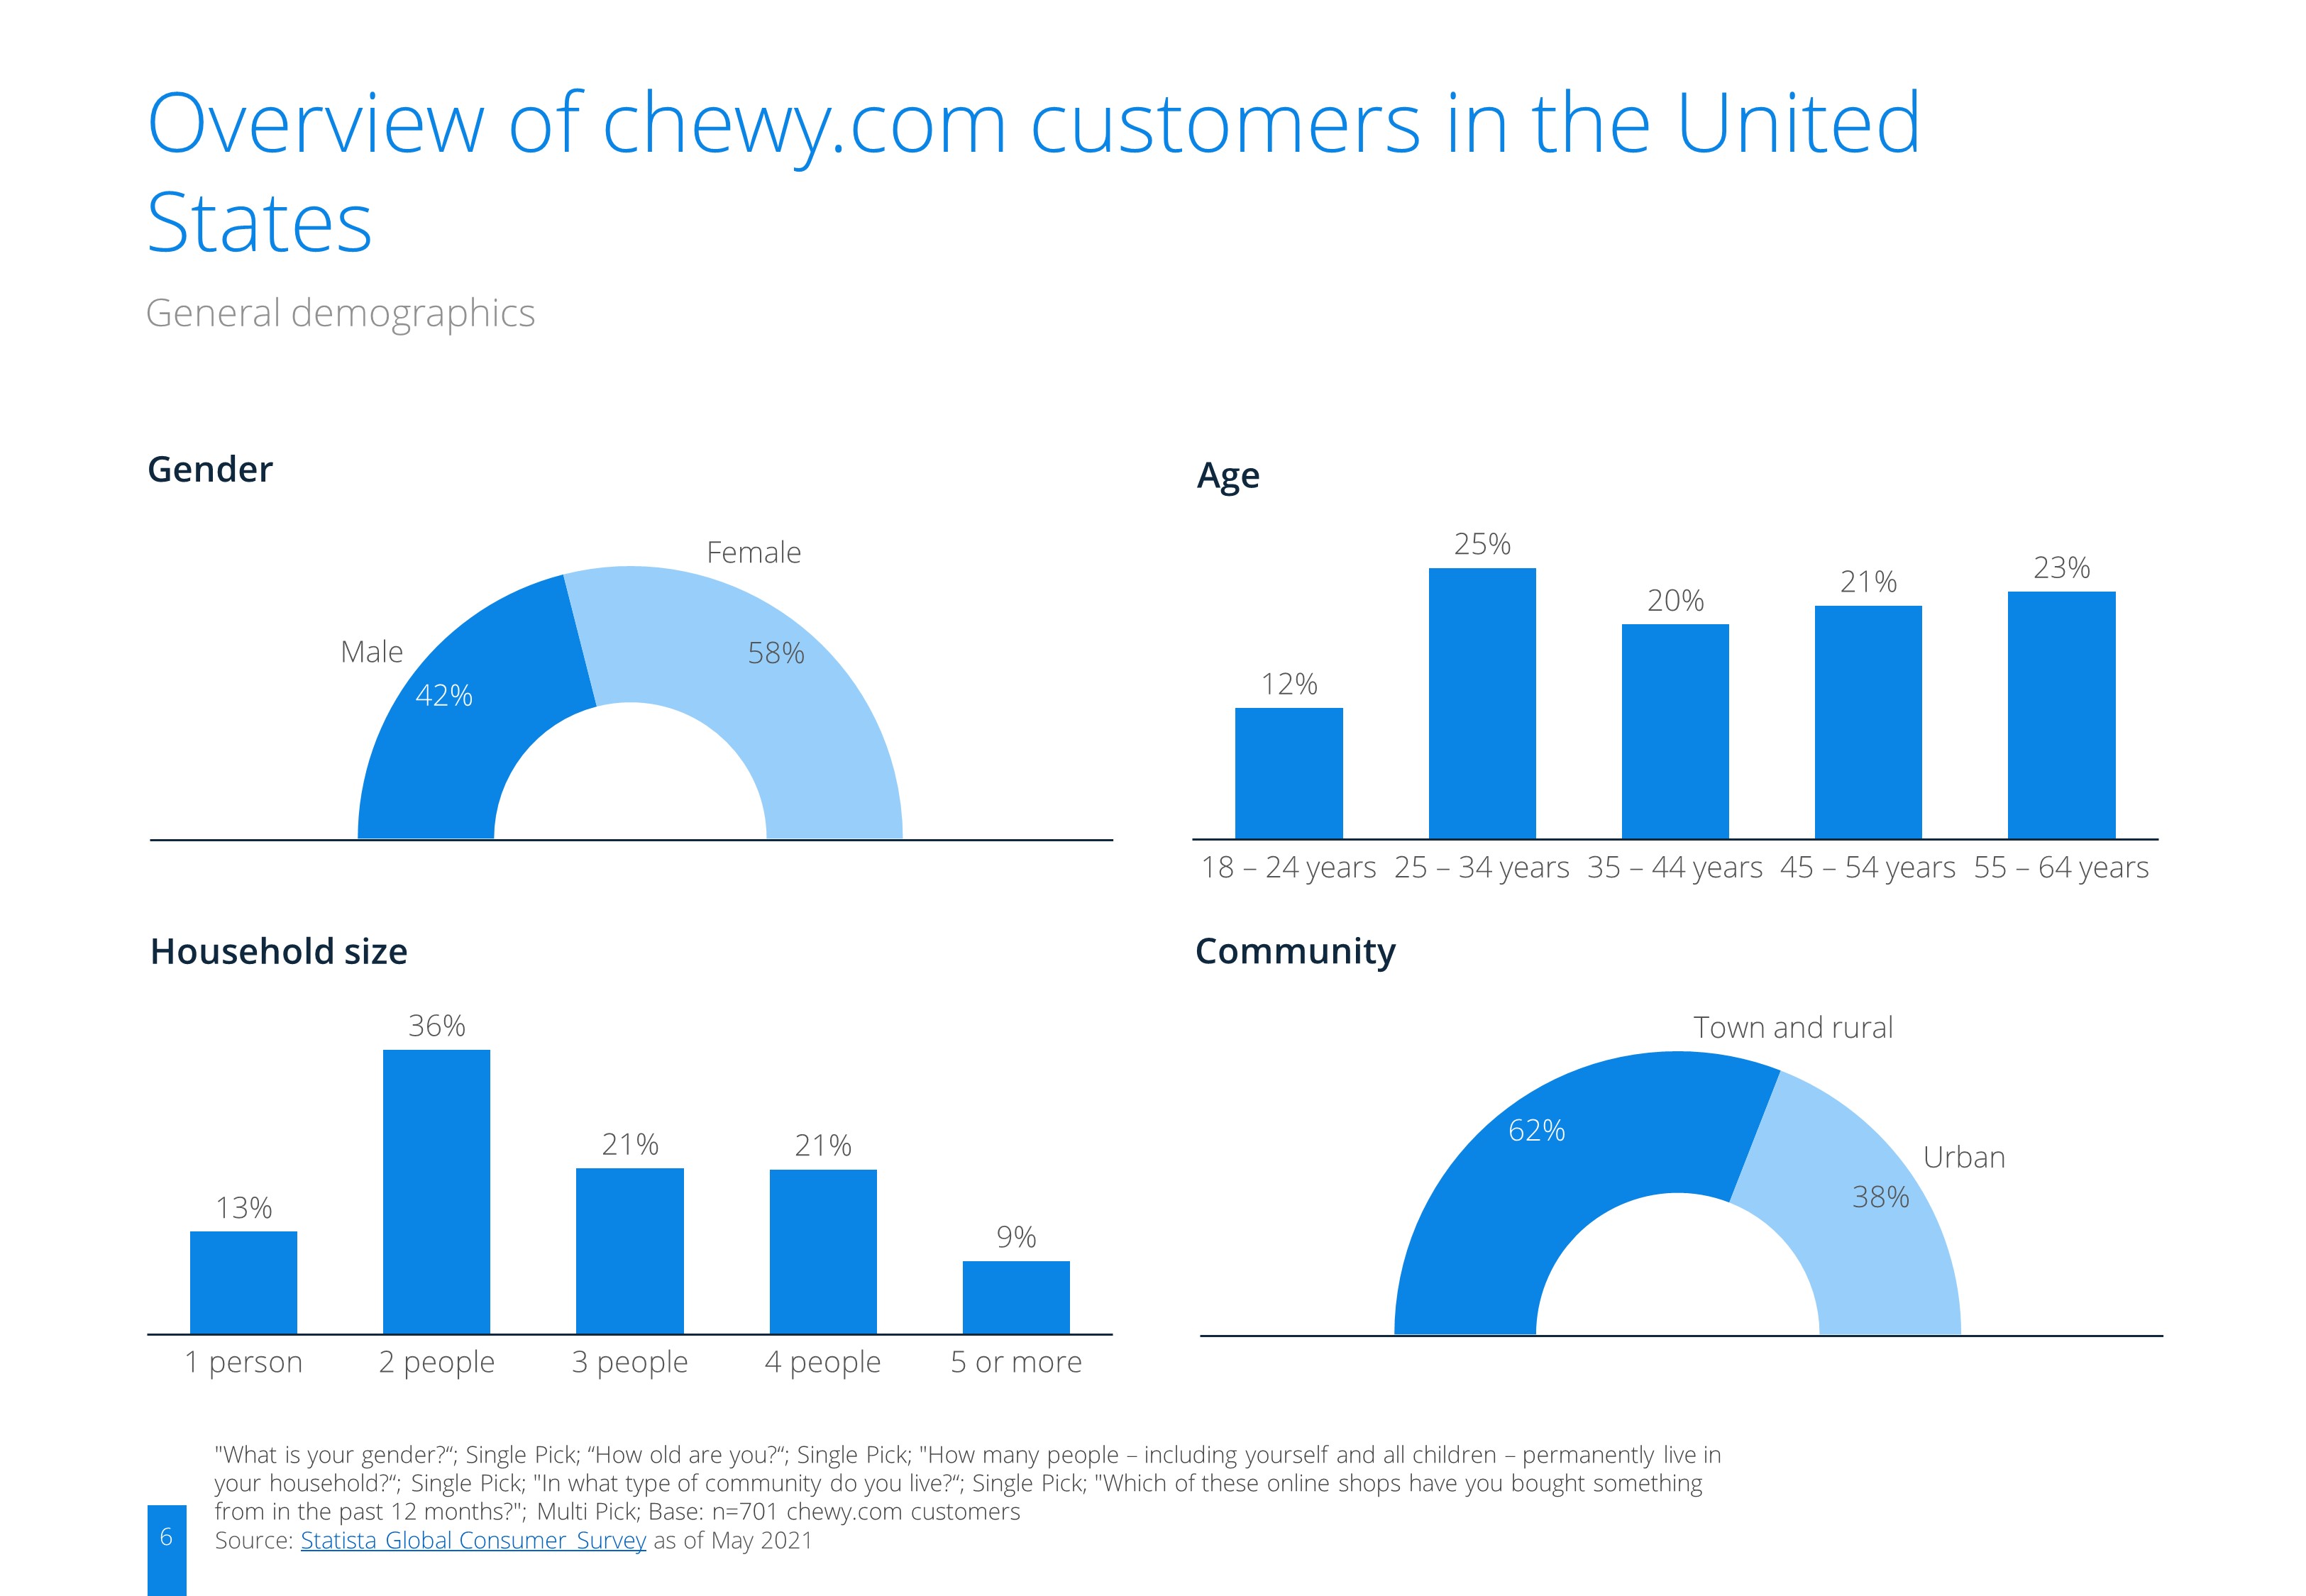 ecommerceDB Infographic: ecommerce_chewy.com_Brand_Report_United States_2021_2.jpg